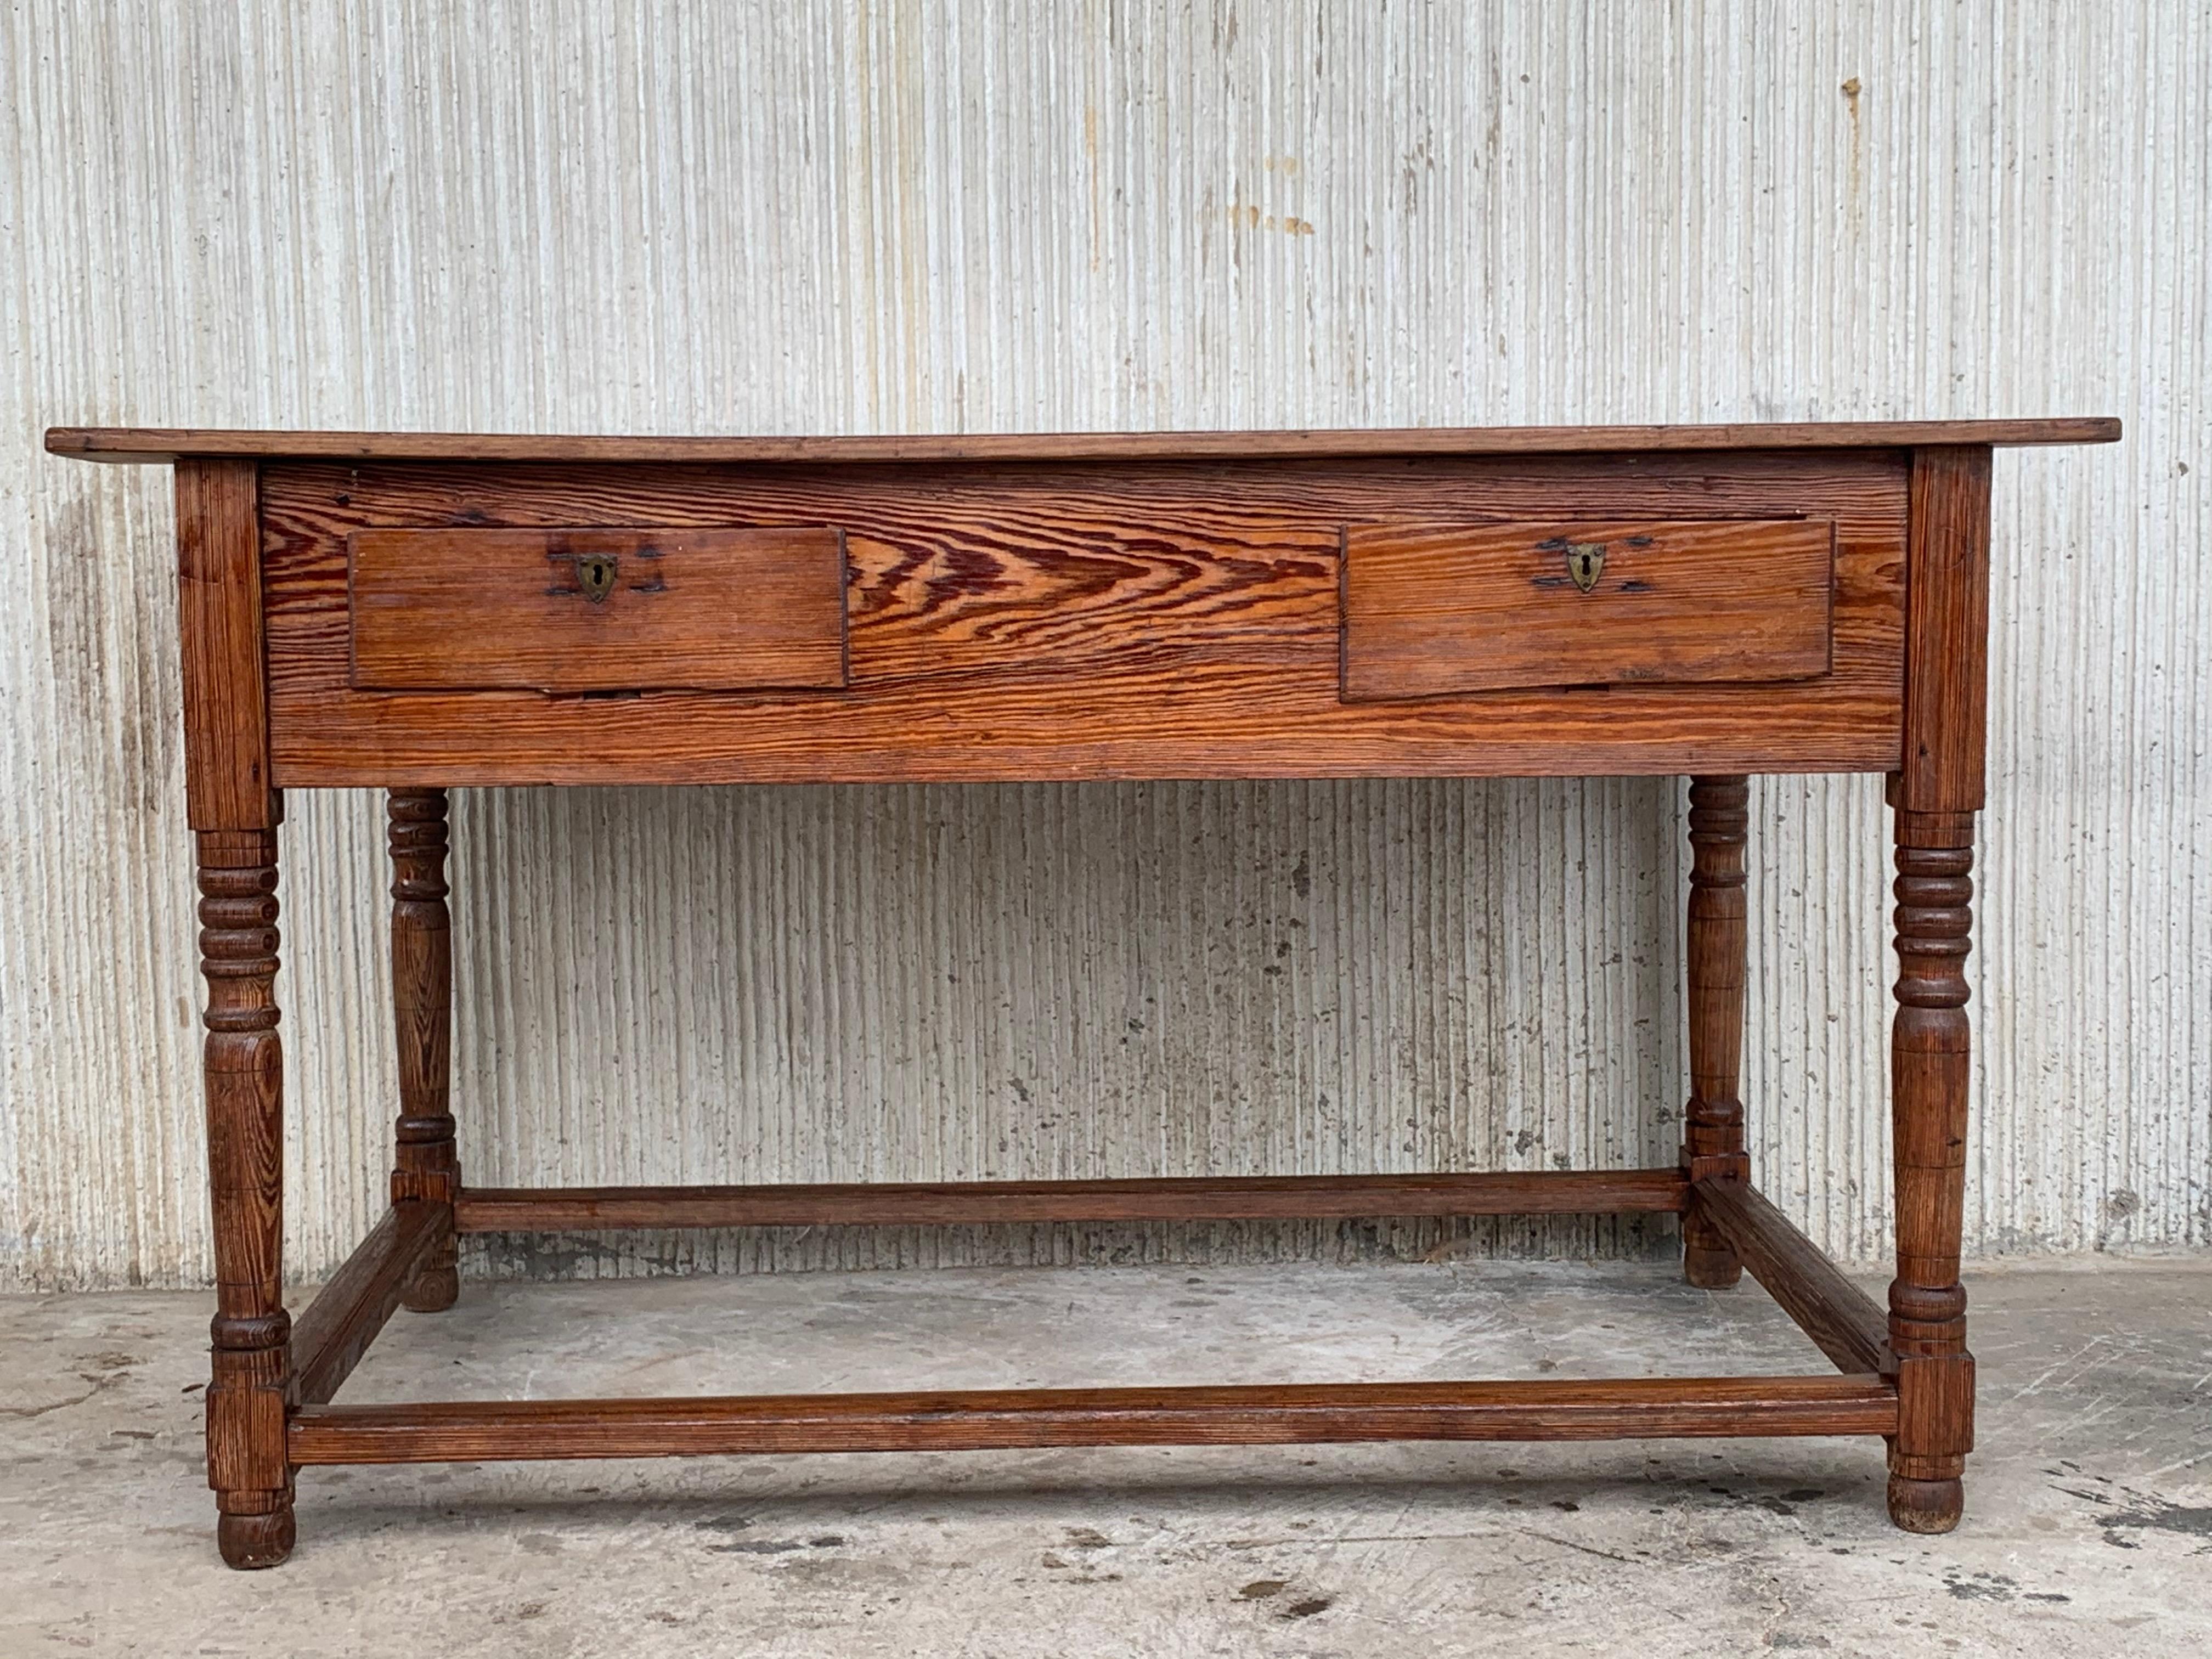 Oak refectory table. The thick 3 plank top on a simple base with no less then 11 drawers, some of then cutout to fit wooden dishes. The whole piece has a beautiful patina and attractive proportions.
Tables like these most likely stood in castle